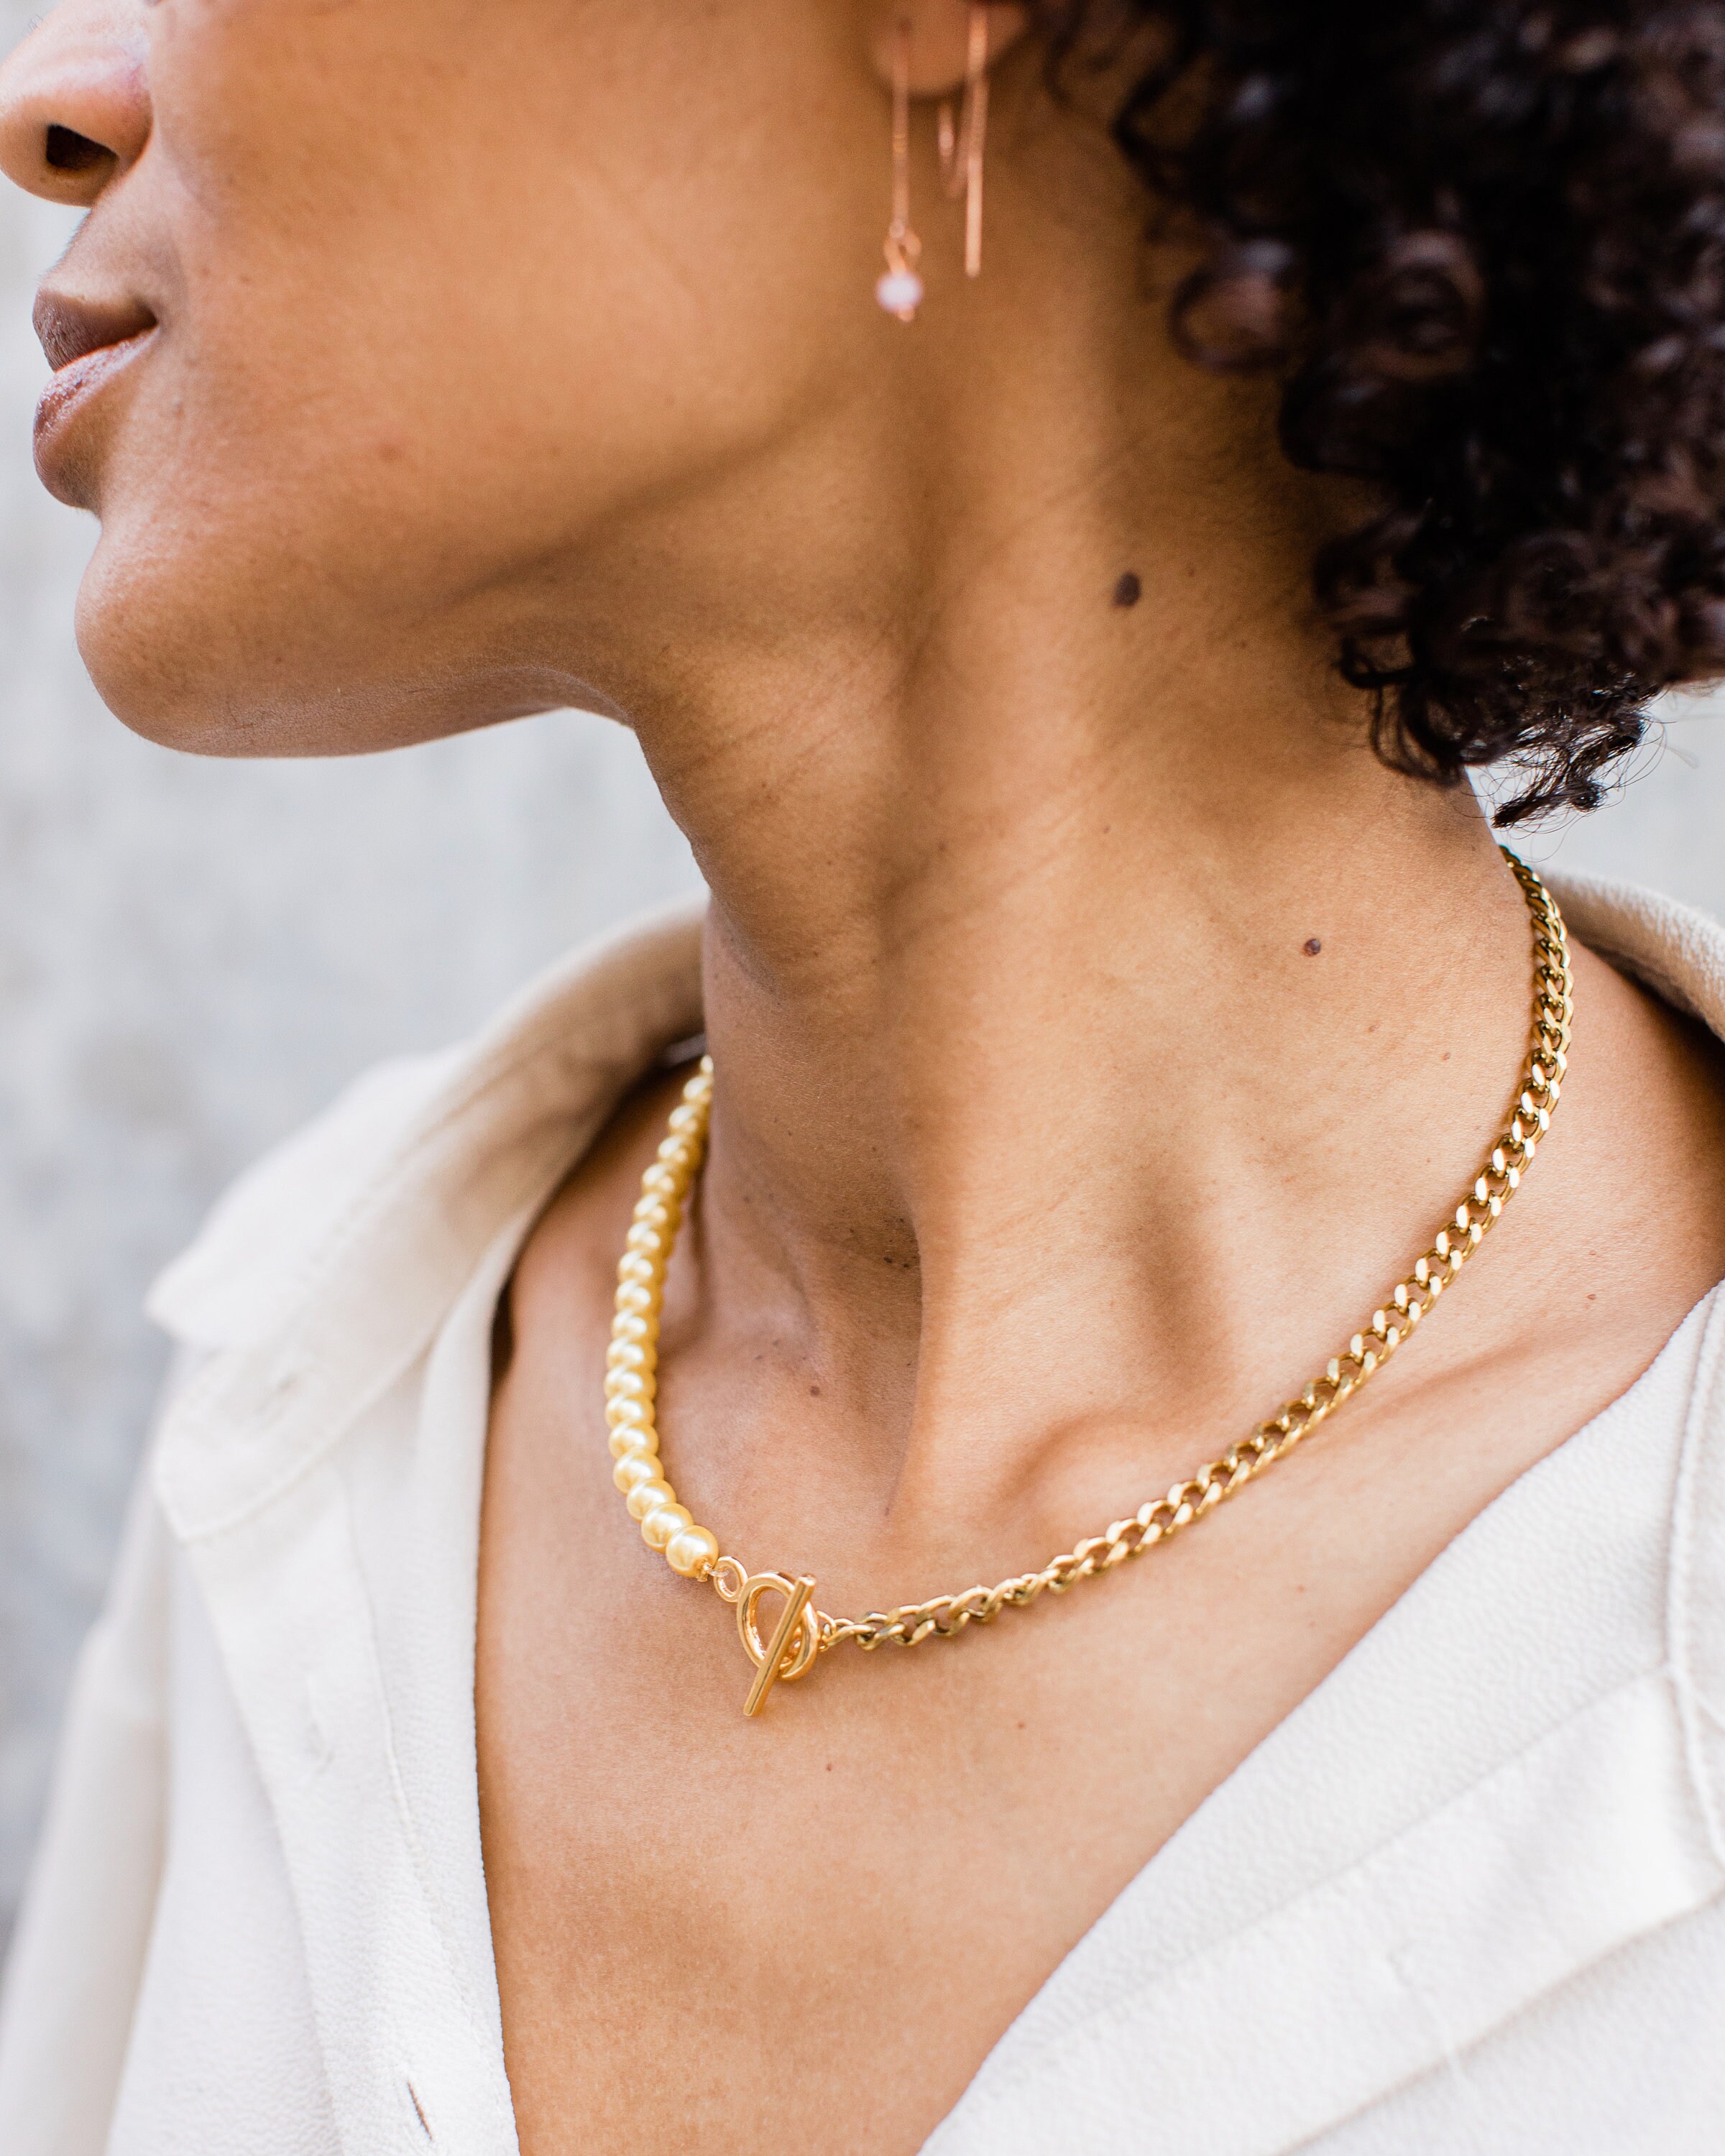 Gold Chain Half Pearl Necklace - Stainless Steel Cuban Chain Necklace - Dainty Pearl Choker - Curb Link T Bar Pendant Toggle Clasp